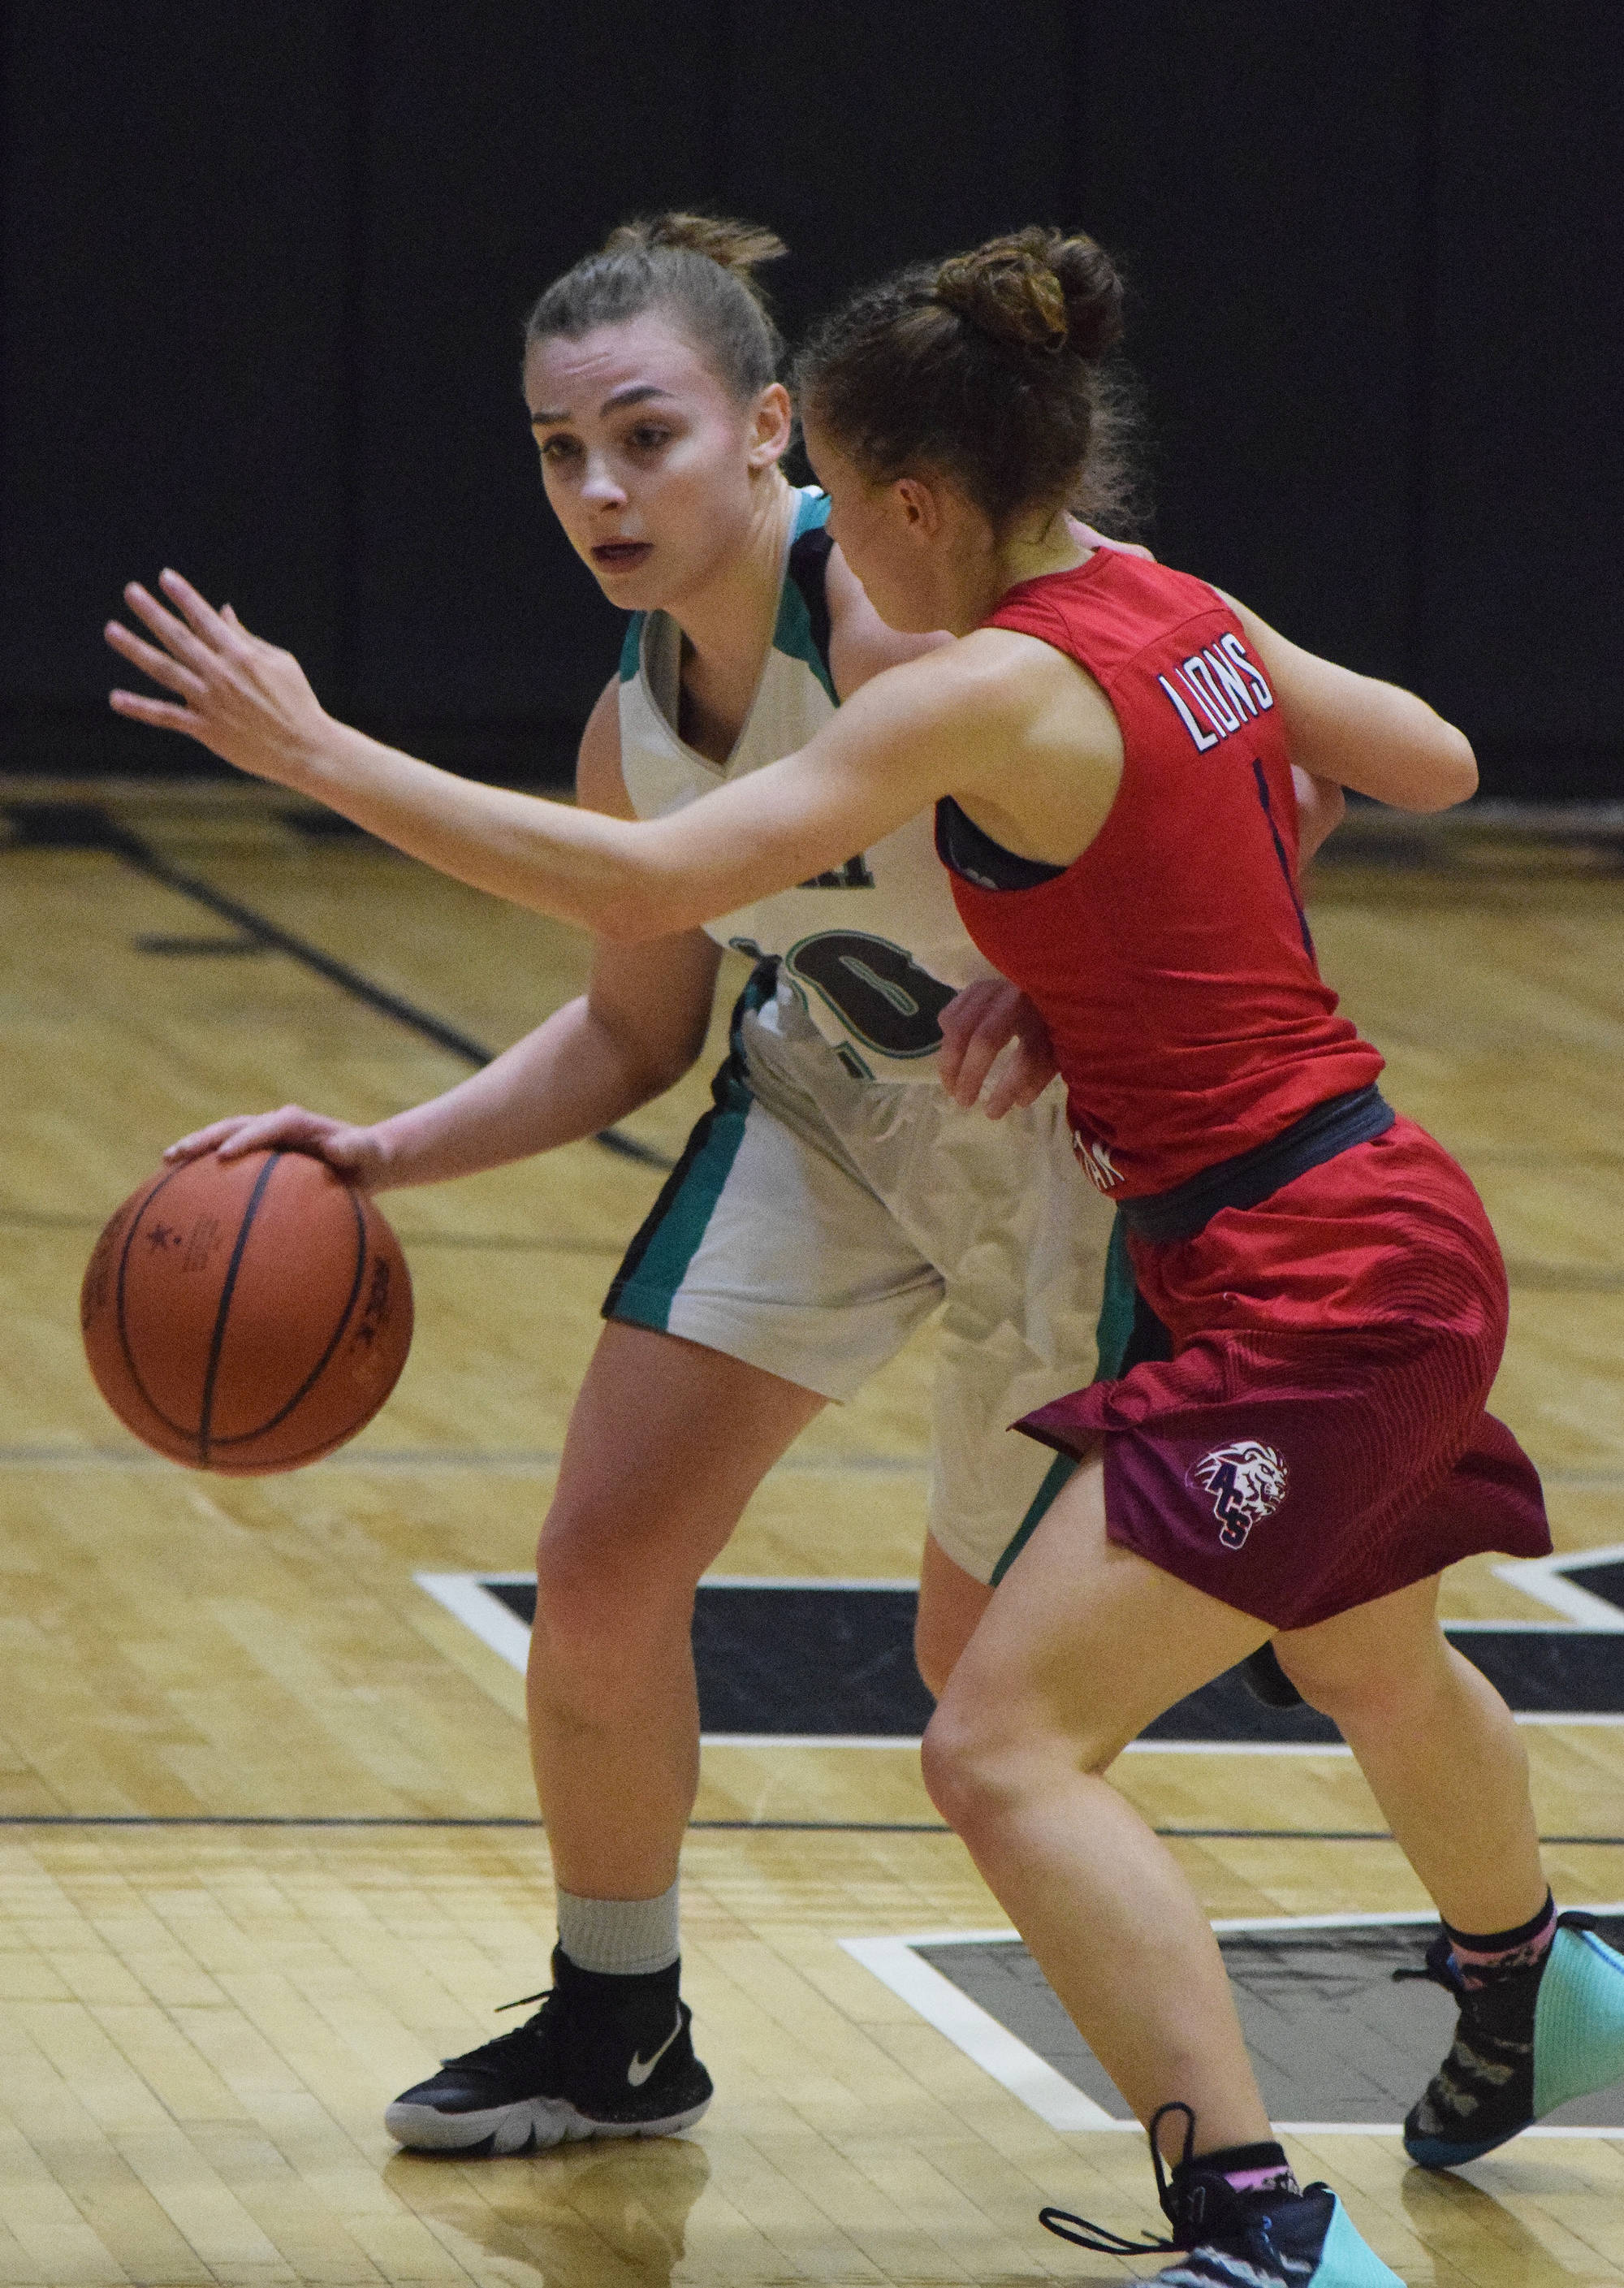 Nikiski’s Bethany Carstens (left) drives against Anchorage’s Mary Kate Parks Friday in a Southcentral Conference contest at Nikiski High School. (Photo by Joey Klecka/Peninsula Clarion)